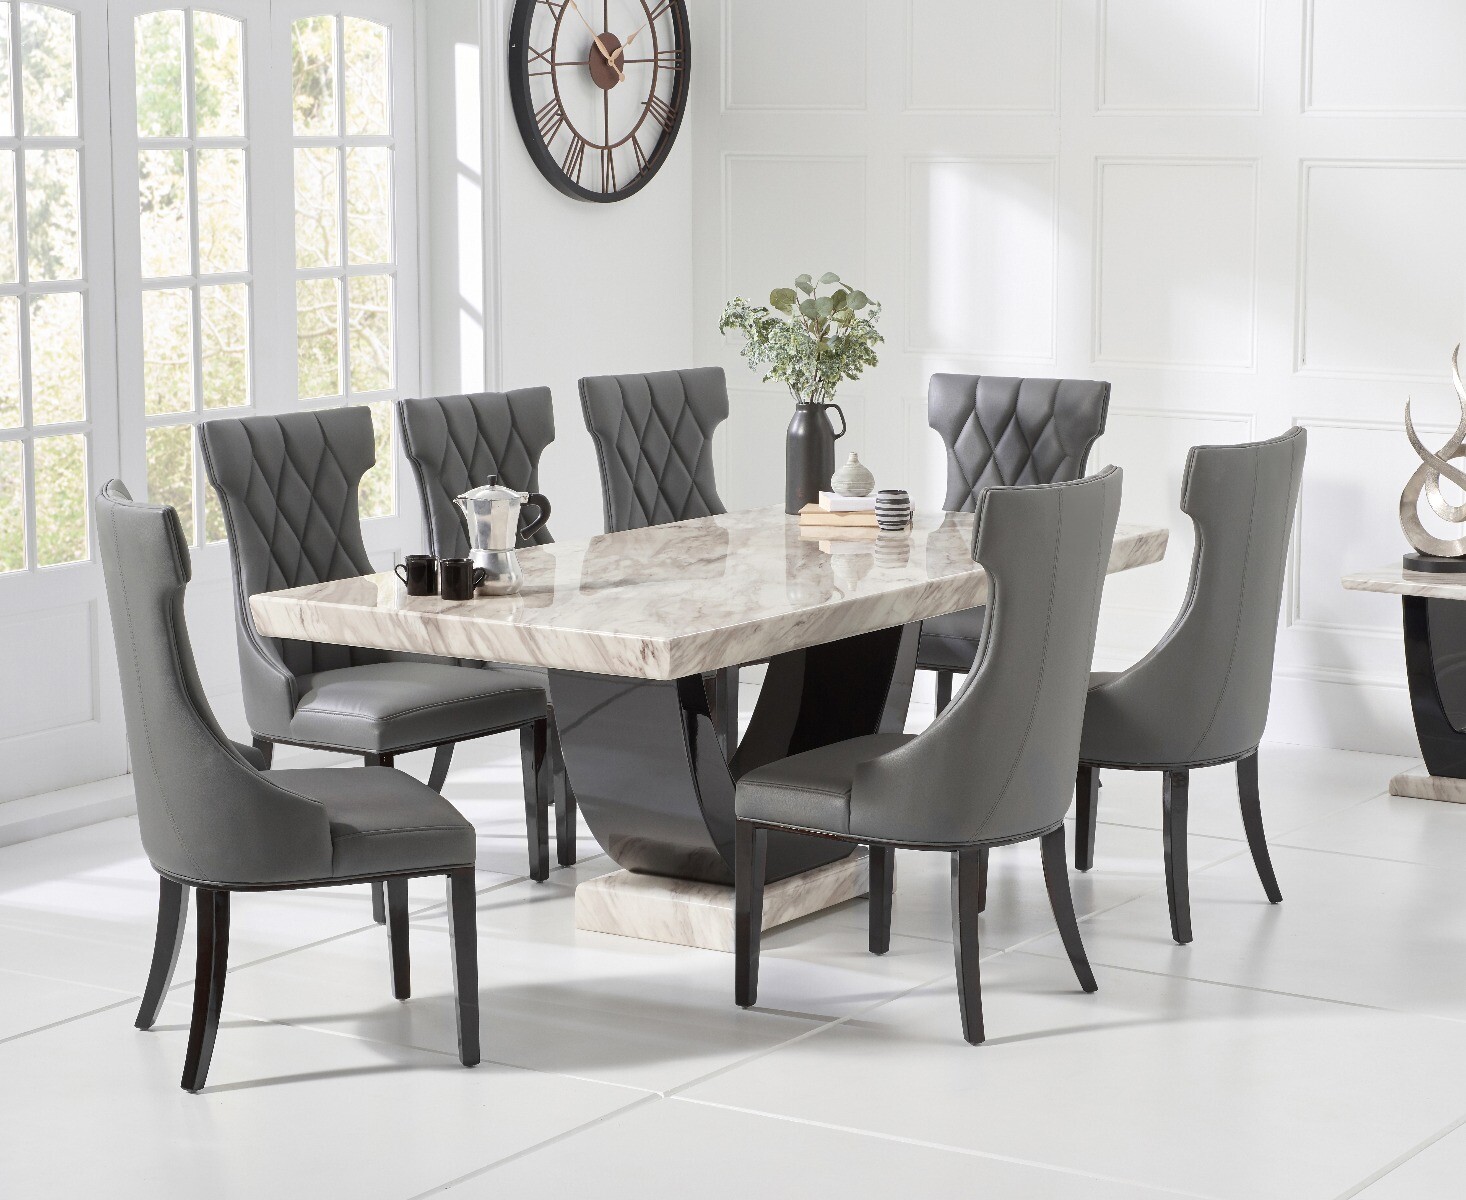 Photo 1 of Novara 200cm cream and black pedestal marble dining table with 6 cream sophia chairs